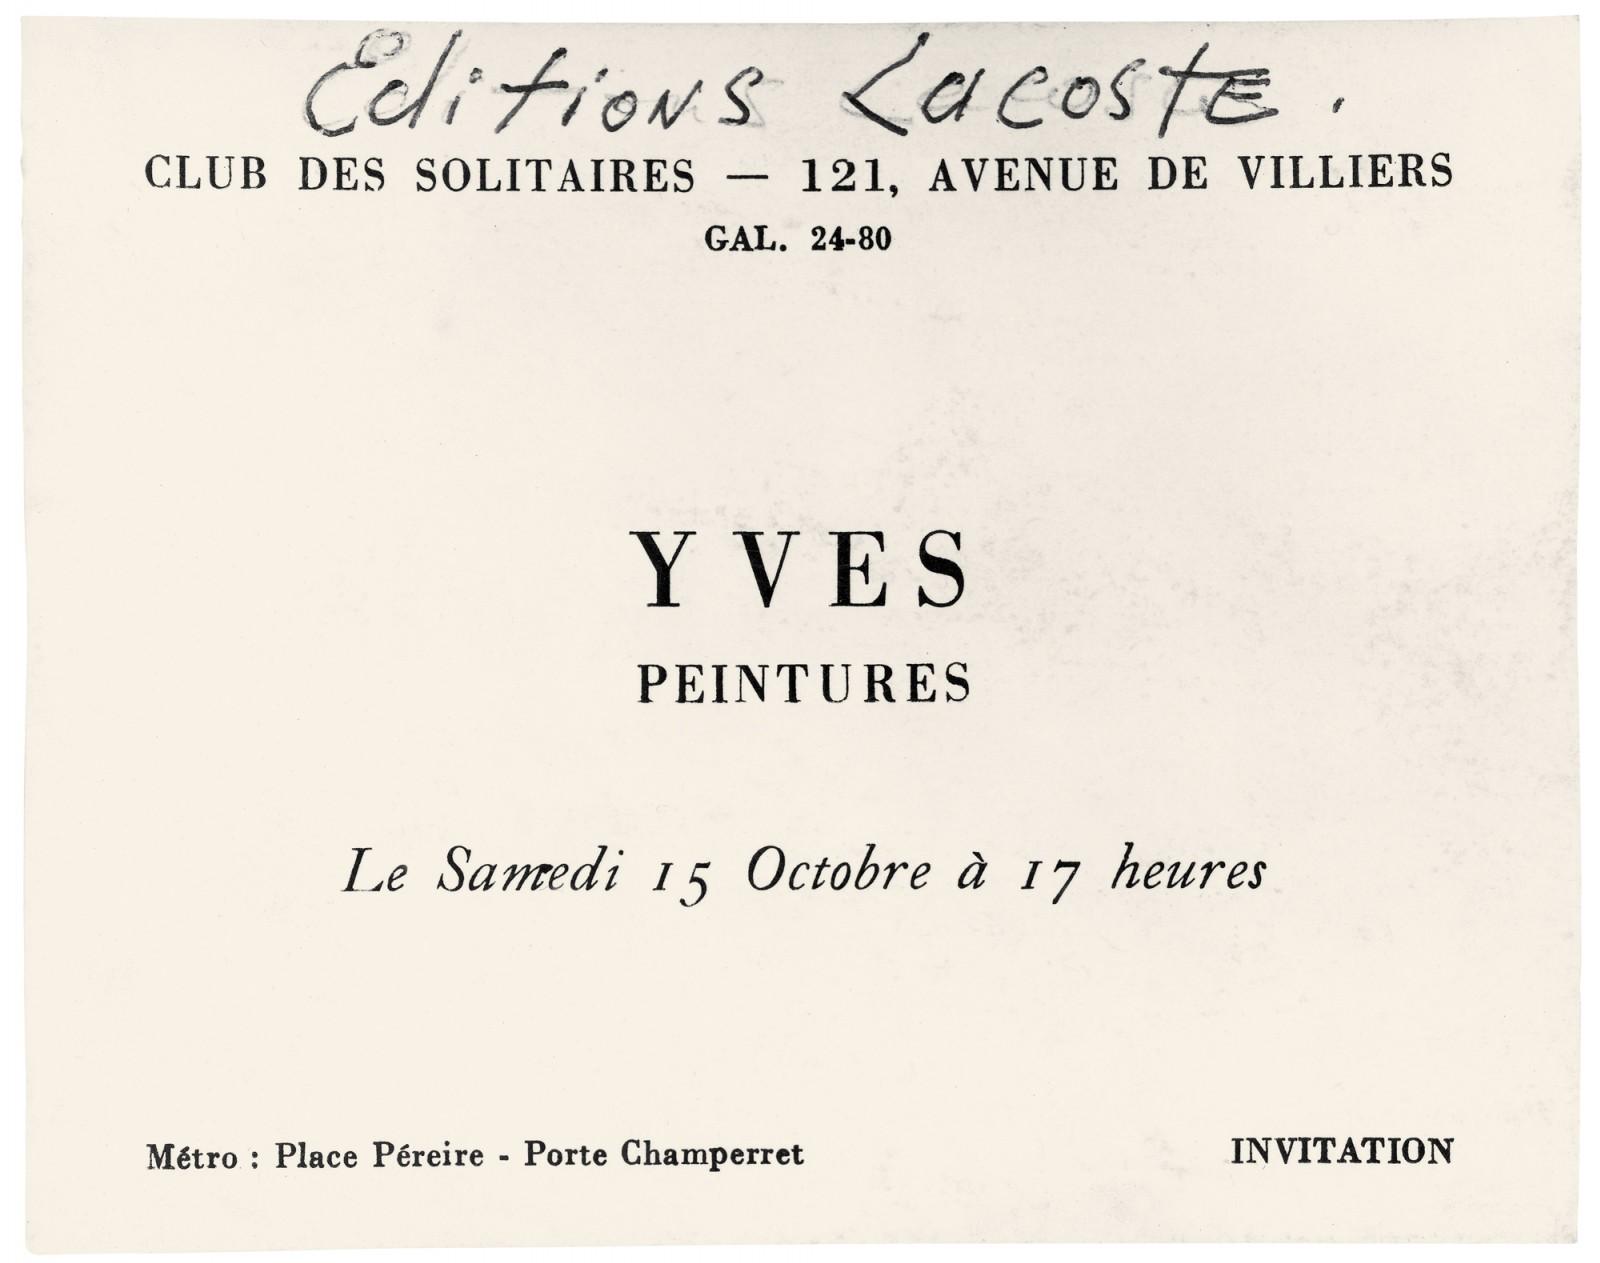 Invitation card to the exhibition "Yves peintures" at Editions Lacoste